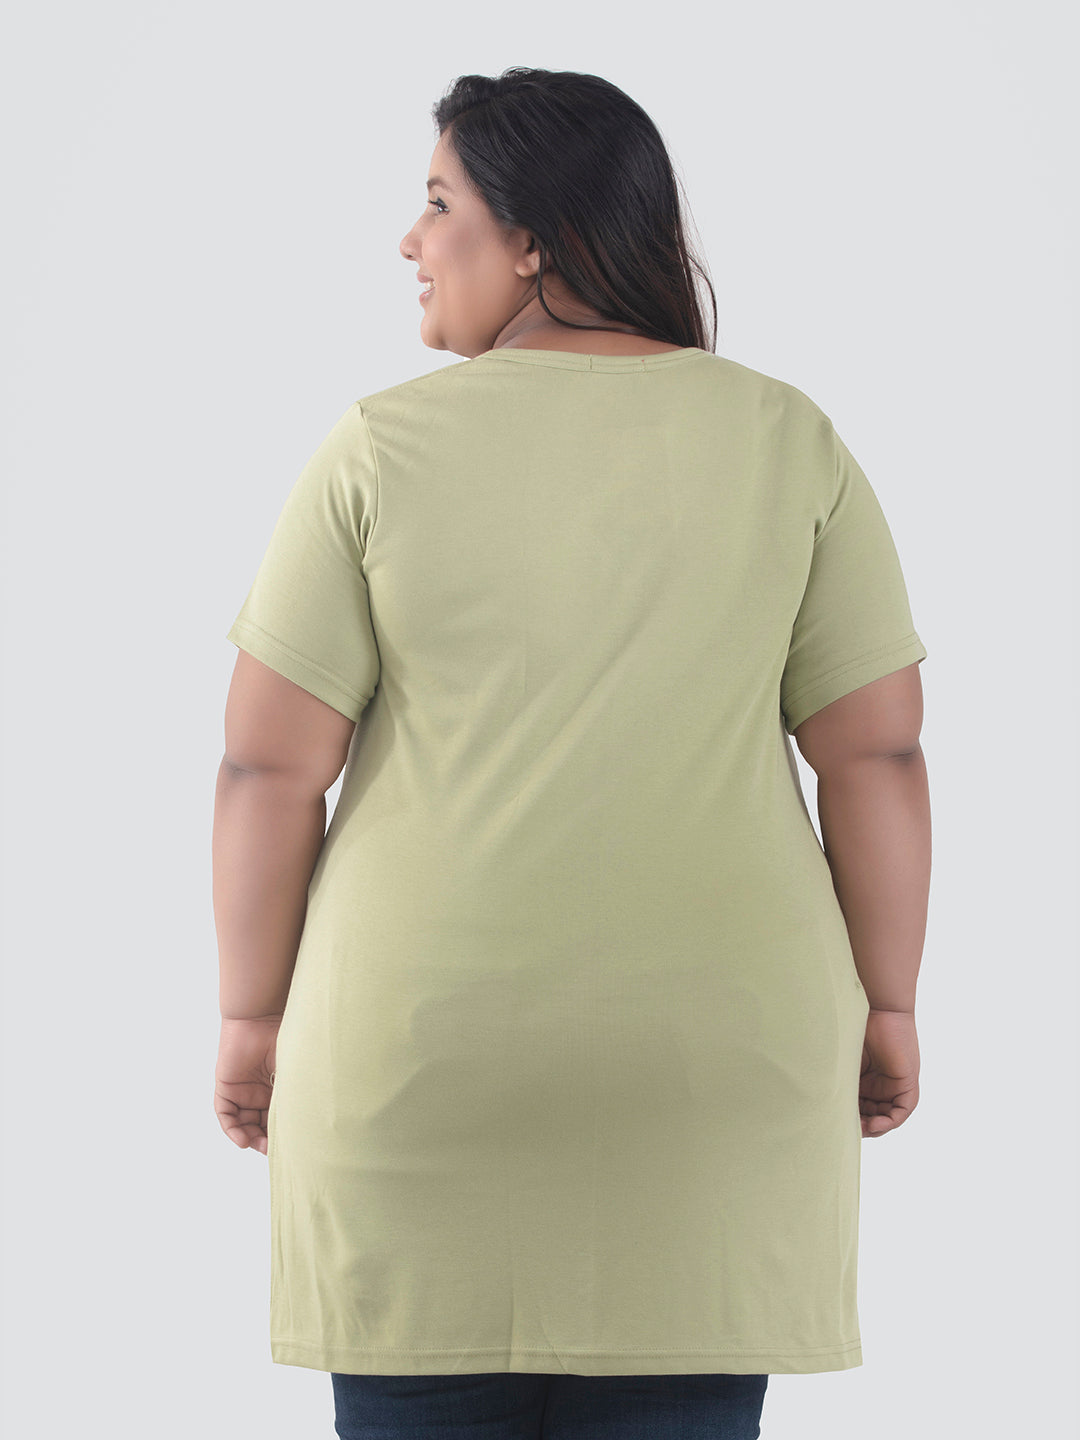 Stylish Cardamom Green Cotton Plus Size Half Sleeves Long Top For Women Online In India